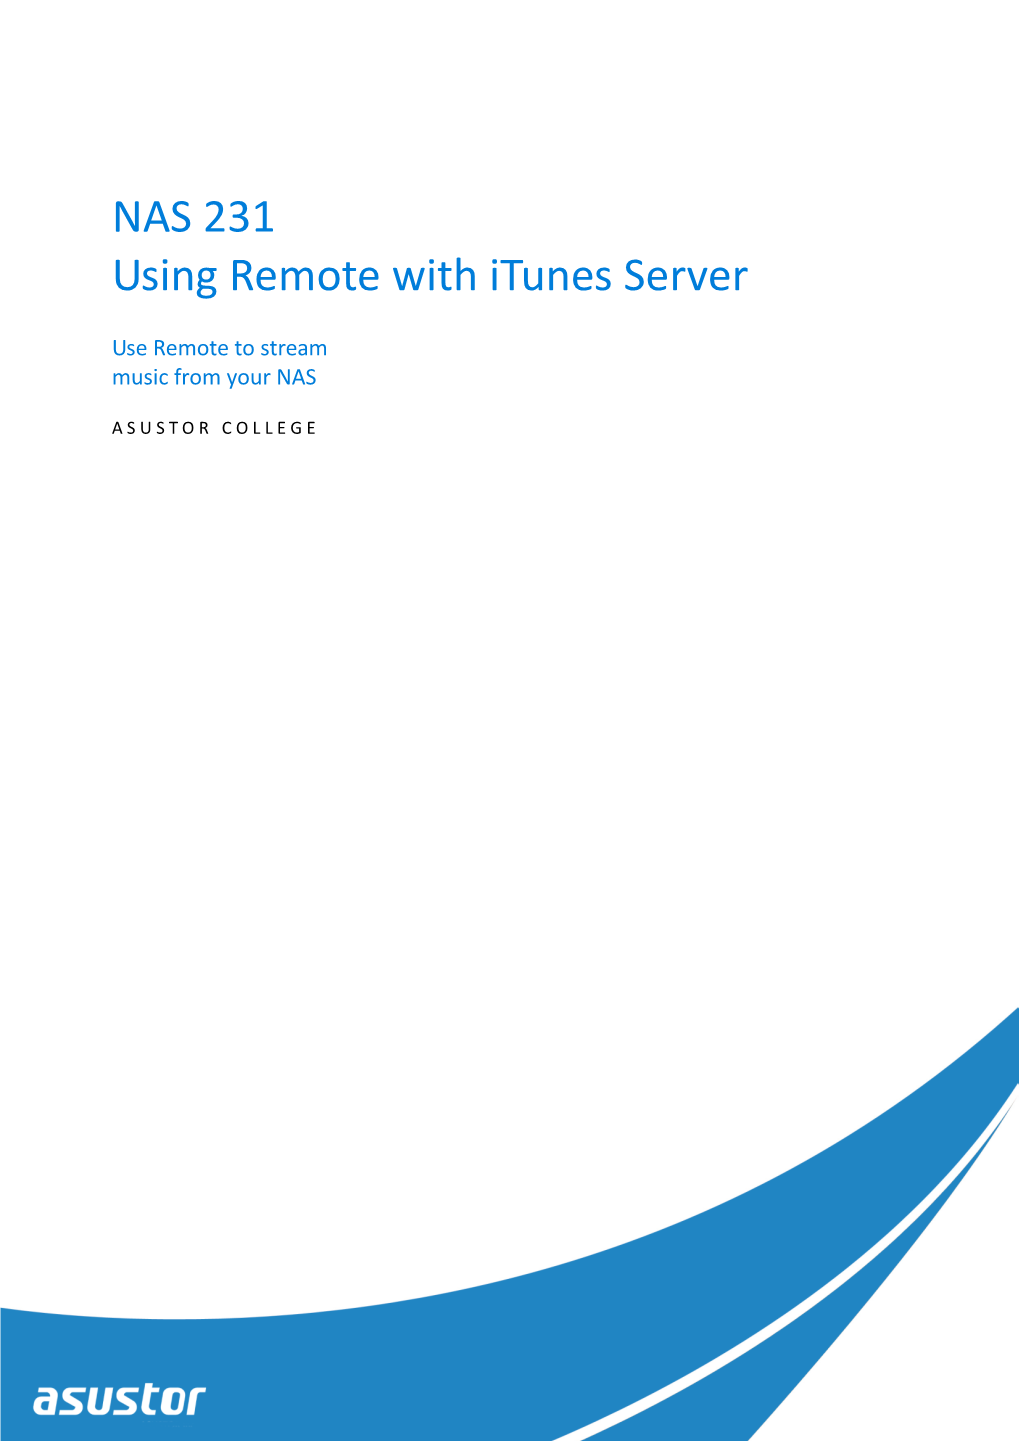 NAS 231 Using Remote with Itunes Server